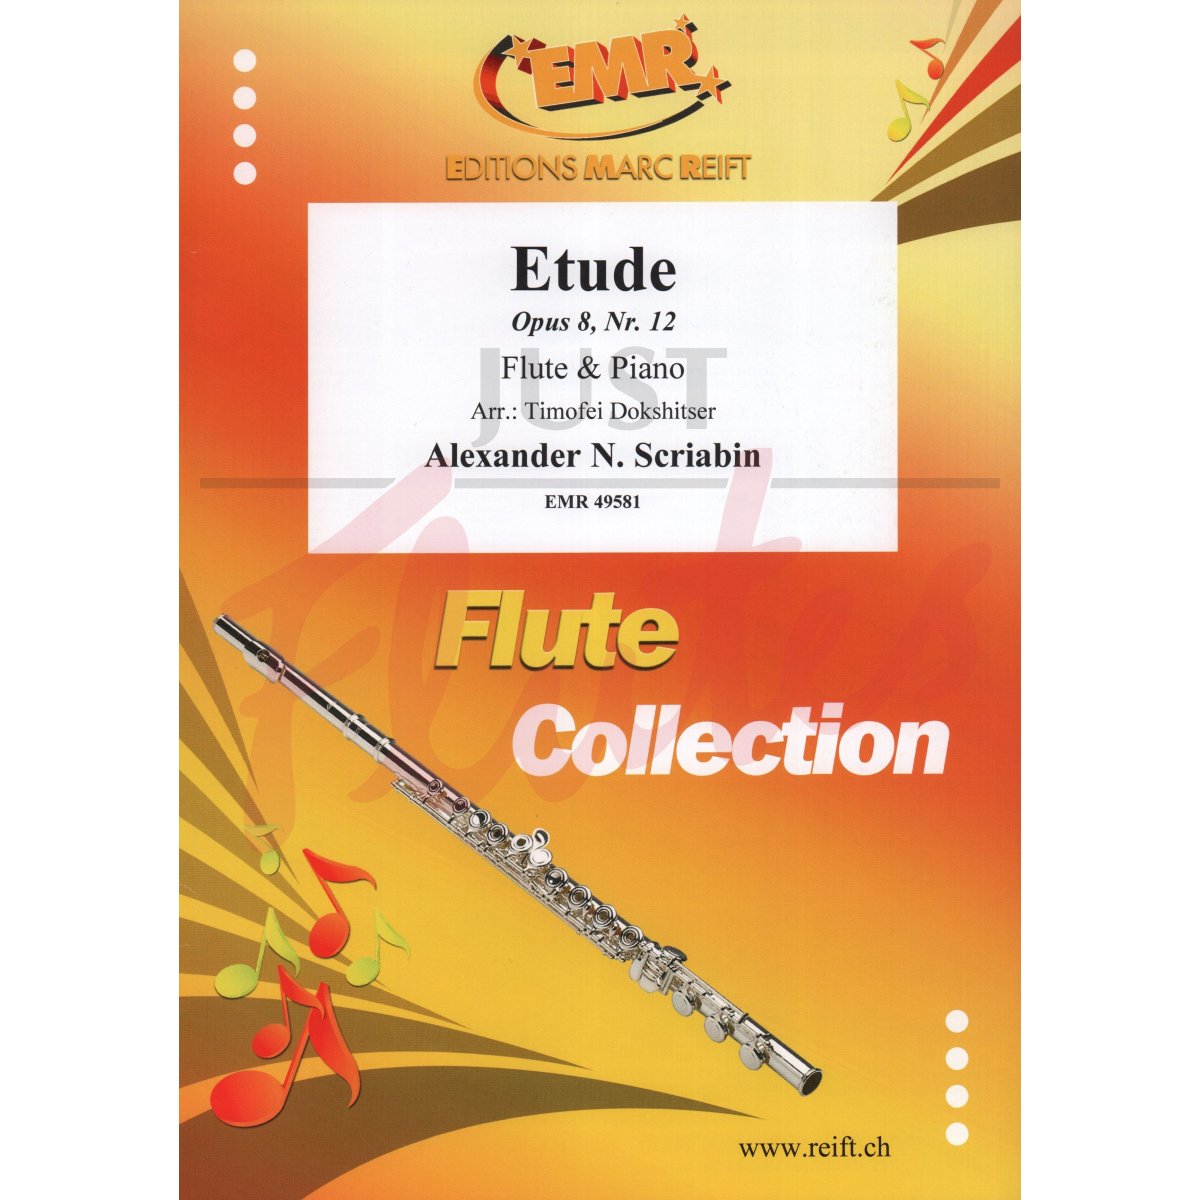 Etude for Flute and Piano